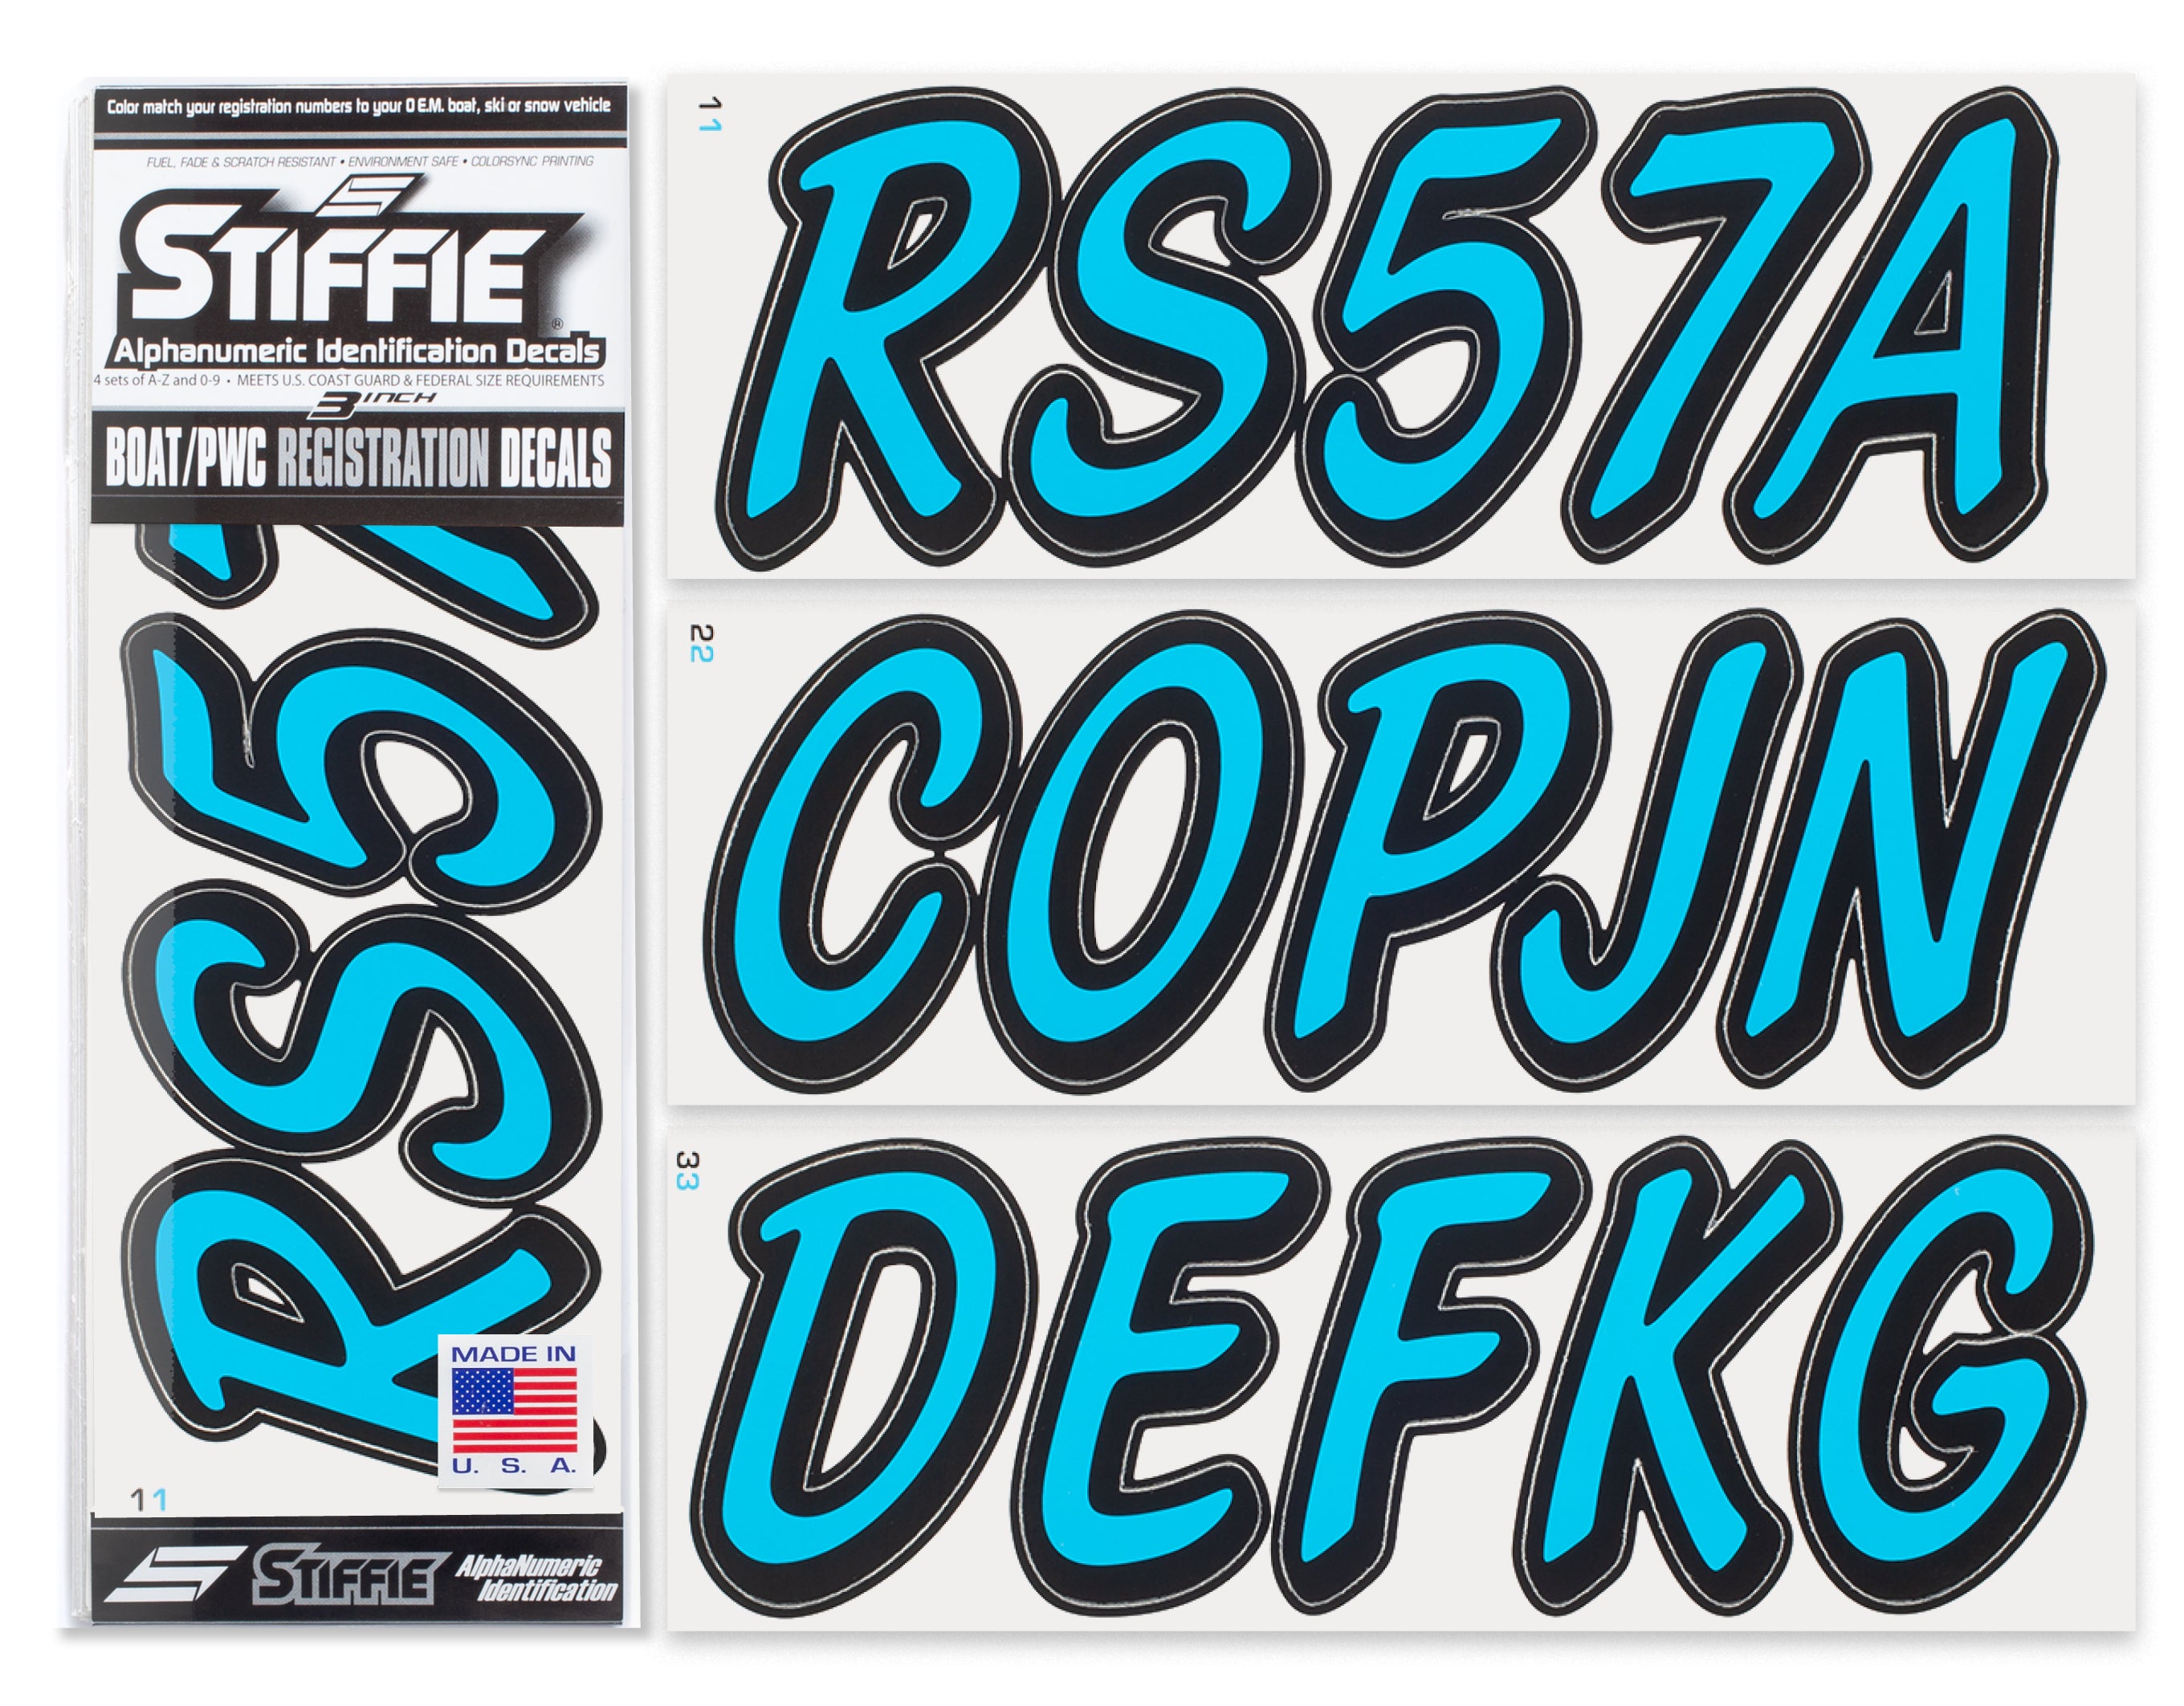 STIFFIE Whipline Solid Sky Blue/Black 3" Alpha-Numeric Registration Identification Numbers Stickers Decals for Boats & Personal Watercraft